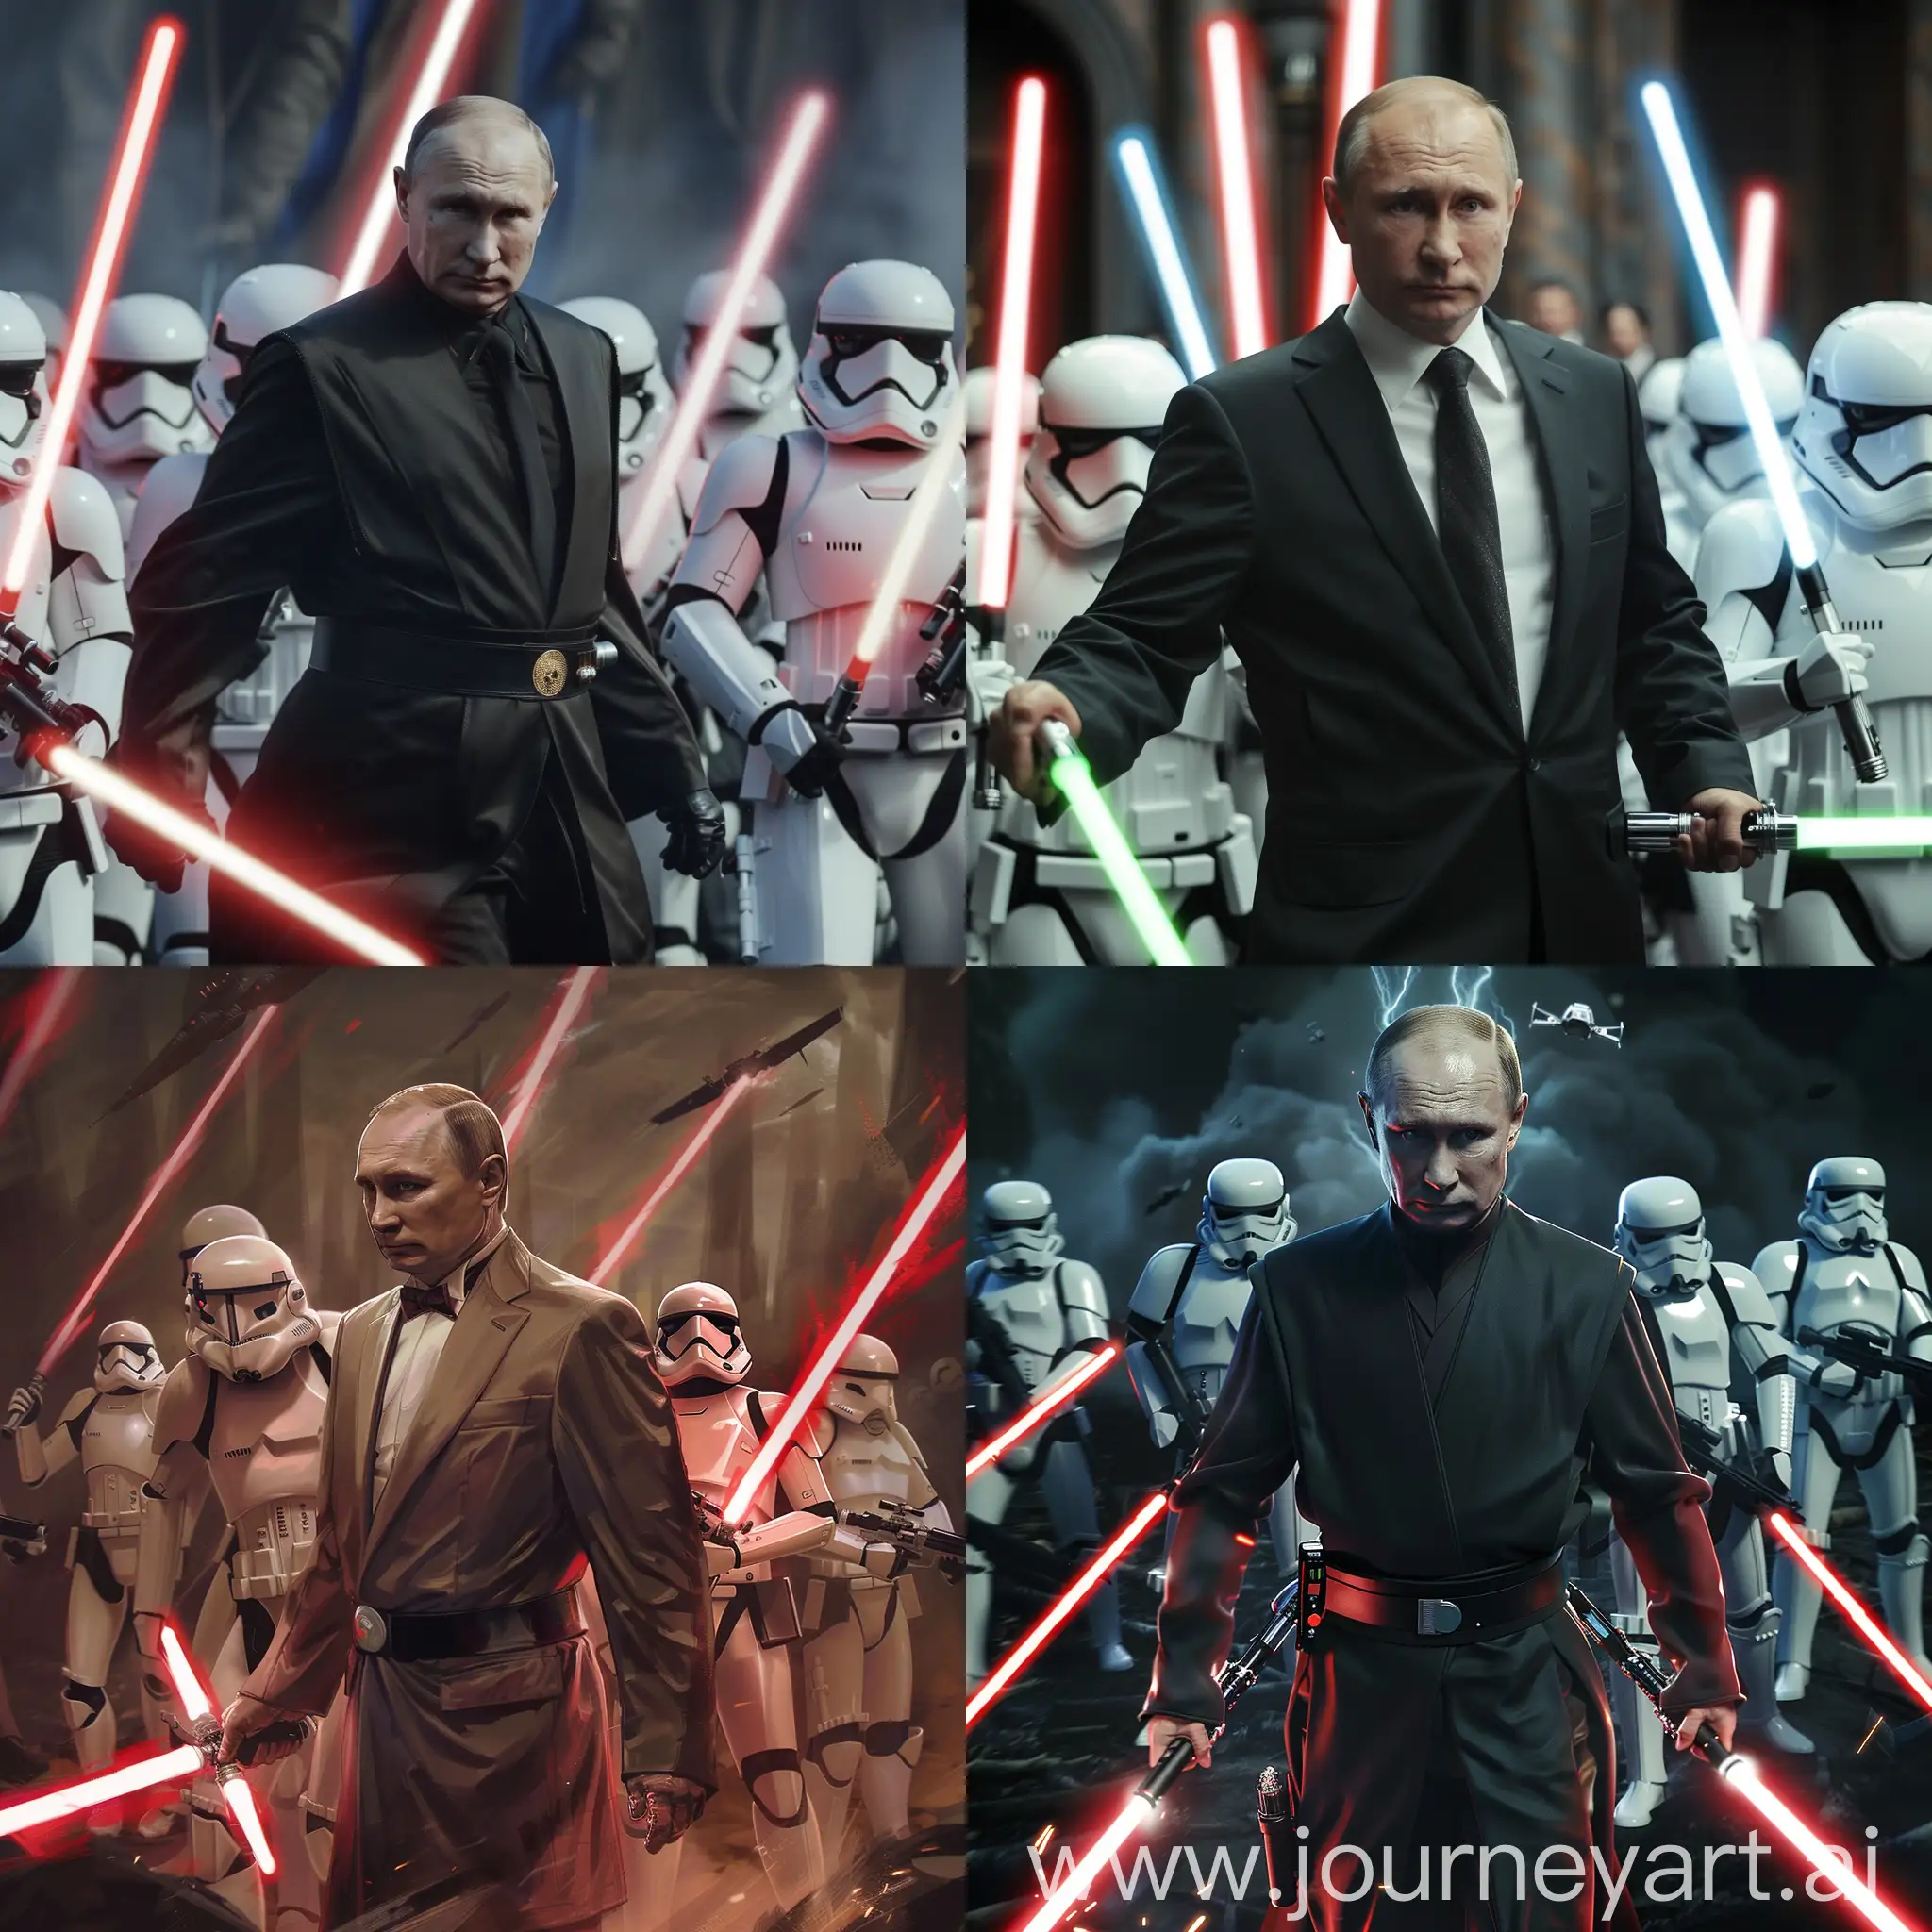 Putin-Leading-Stormtroopers-and-Jedi-Army-into-Attack